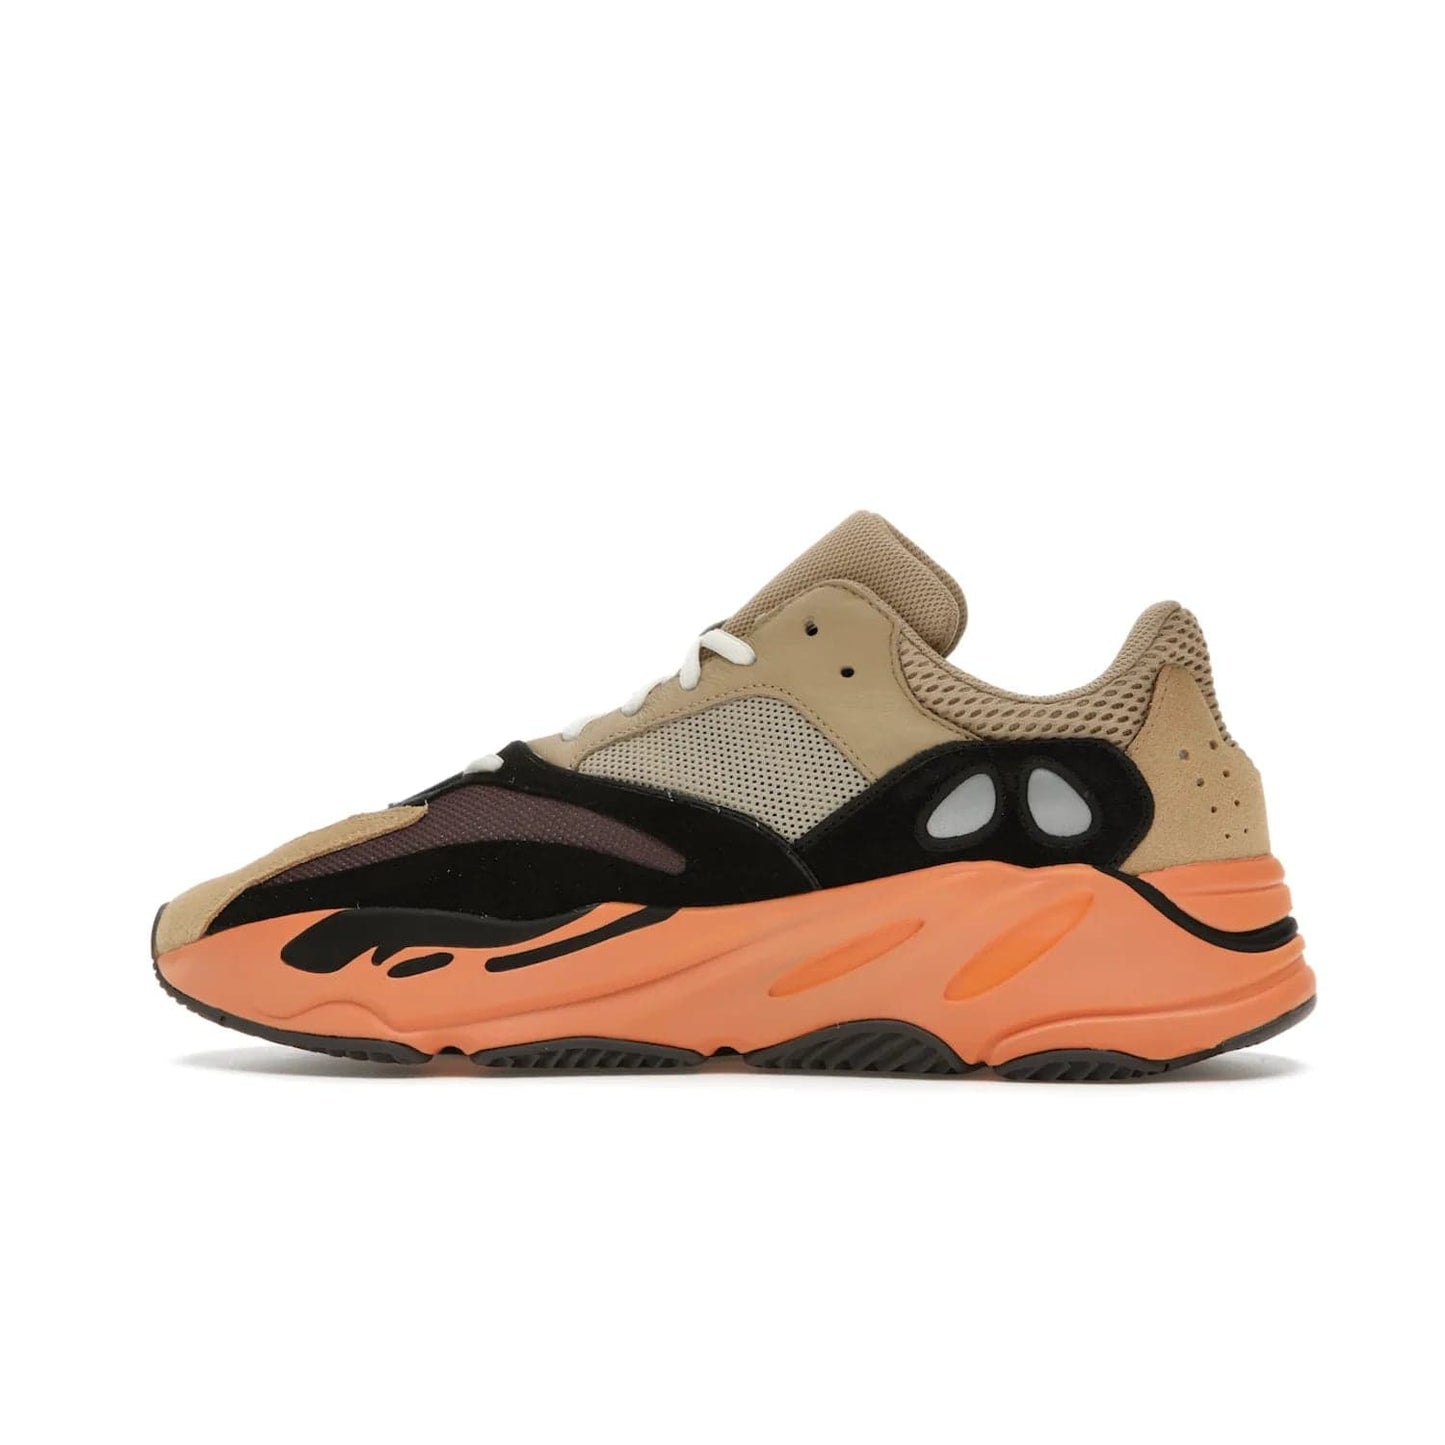 adidas Yeezy Boost 700 Enflame Amber - Image 20 - Only at www.BallersClubKickz.com - Adidas Yeezy Boost 700 Enflame Amber: Eye-catching design with pale yellow, brown, teal, and orange! Get yours in June 2021.